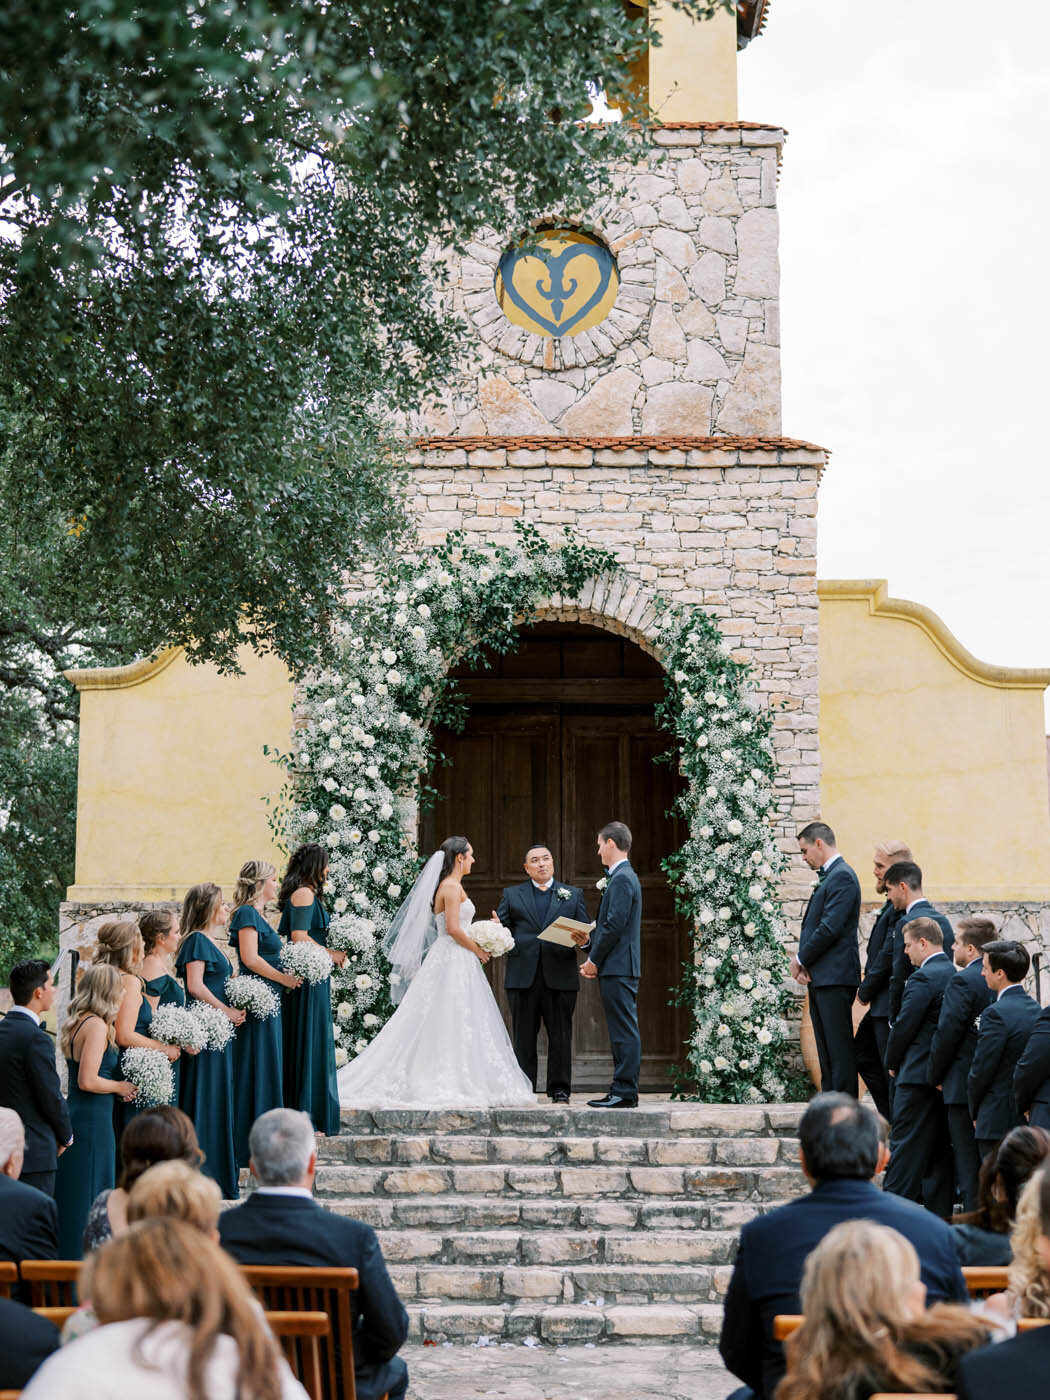 a ceremony on the stairs of ian's chapel with a green and white floral arch